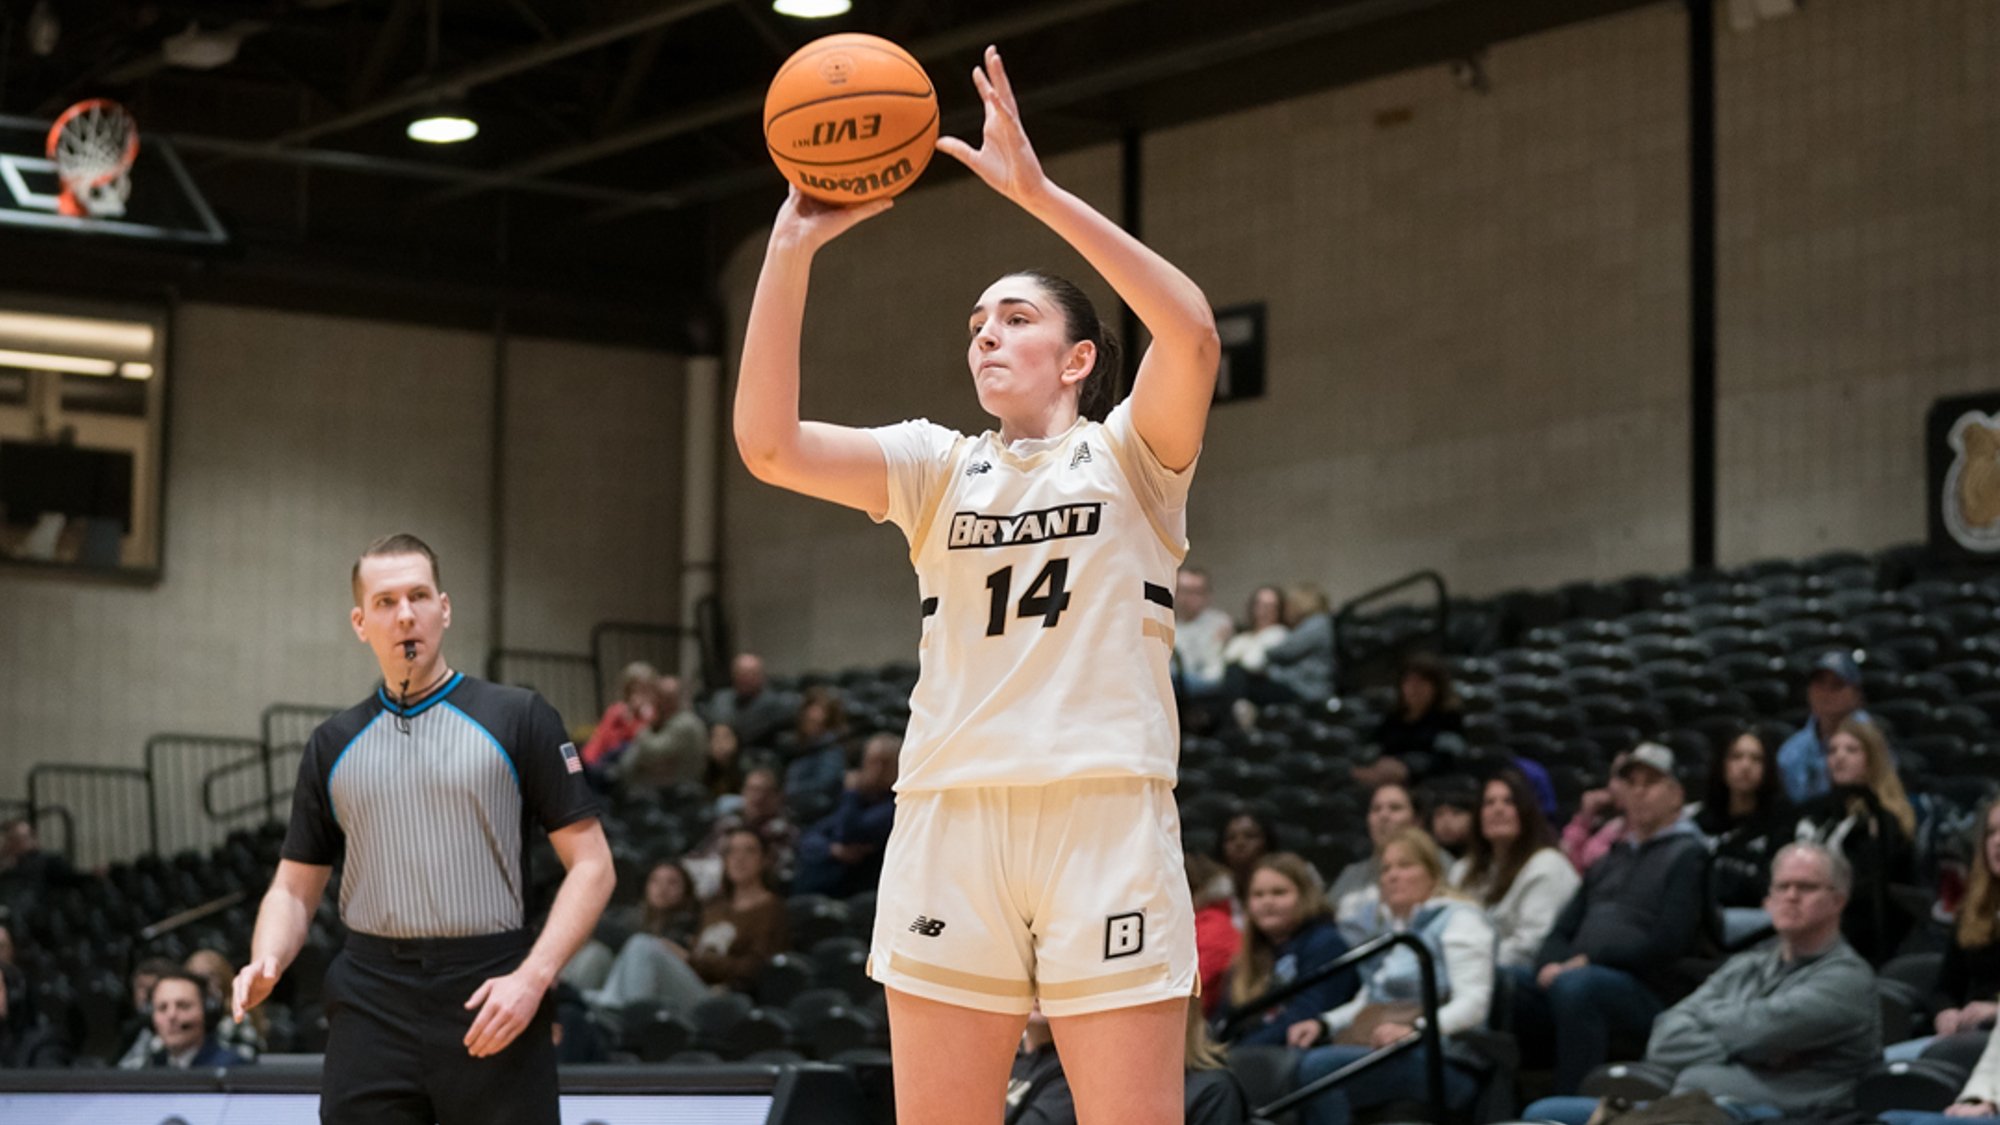 Bryant falls short to Maine at home on Saturday